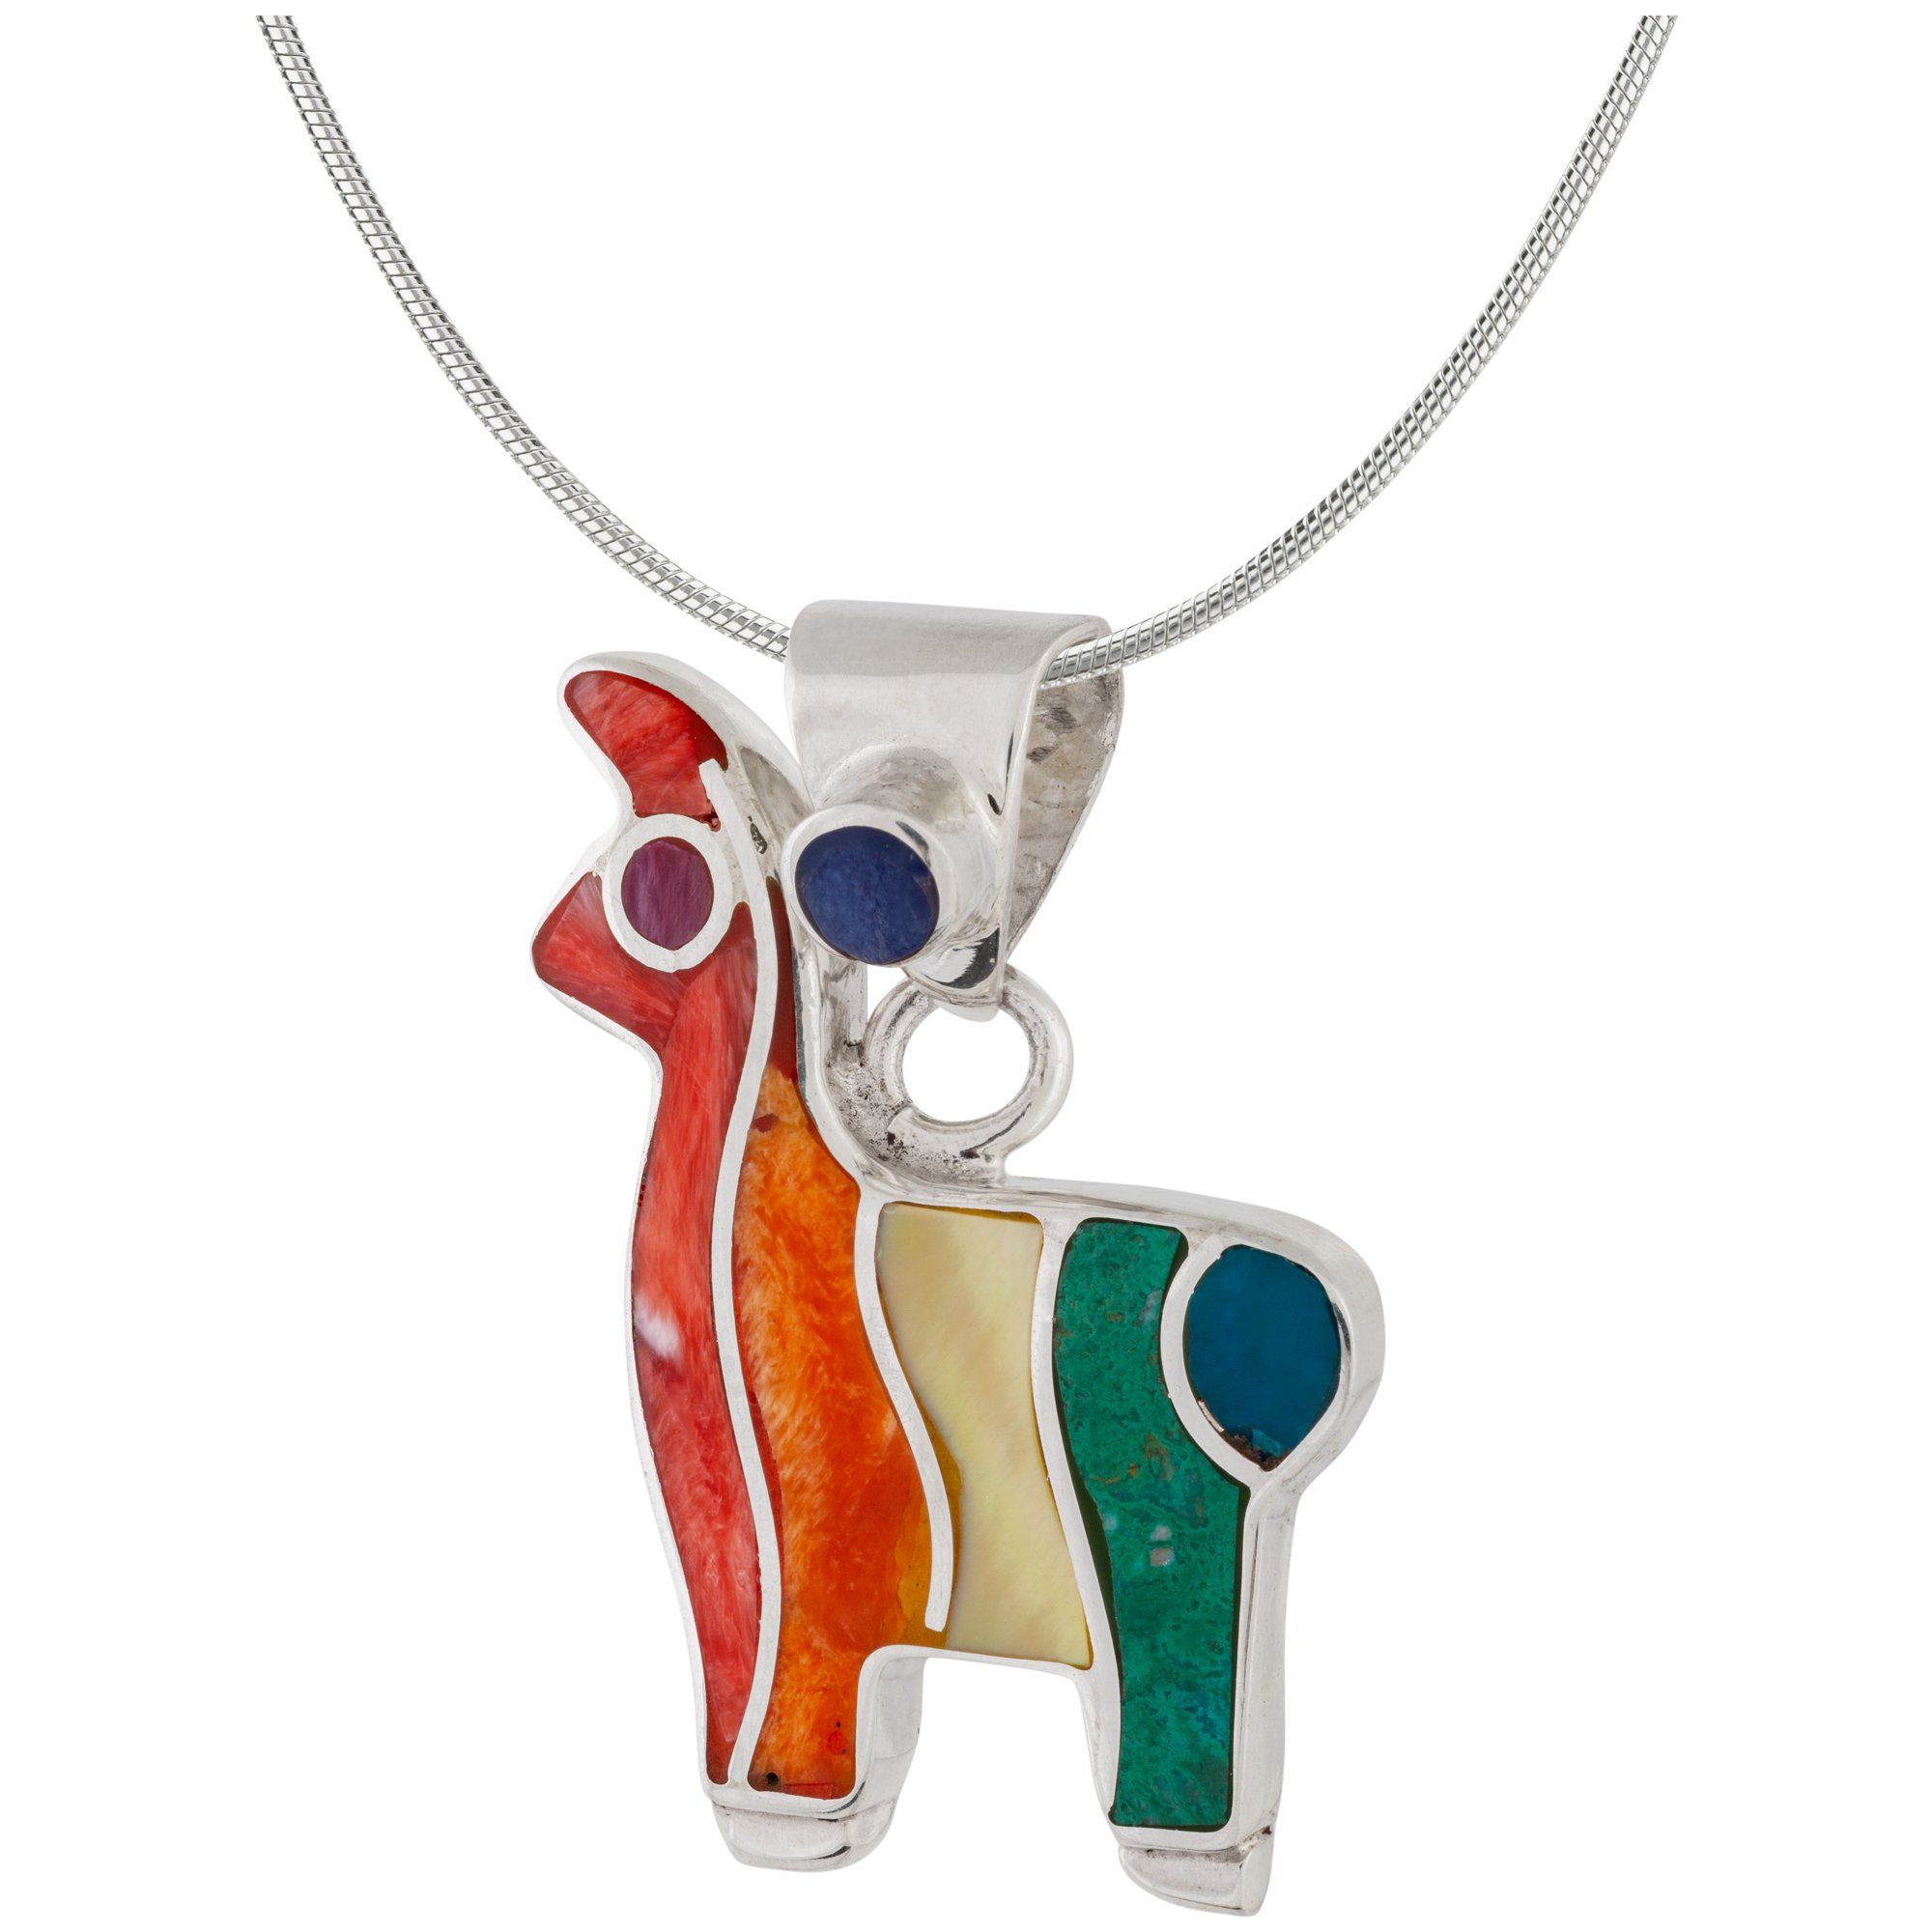 Earth's Splendor Gemstone & Sterling Necklace - Llama - With Sterling Cable Chain